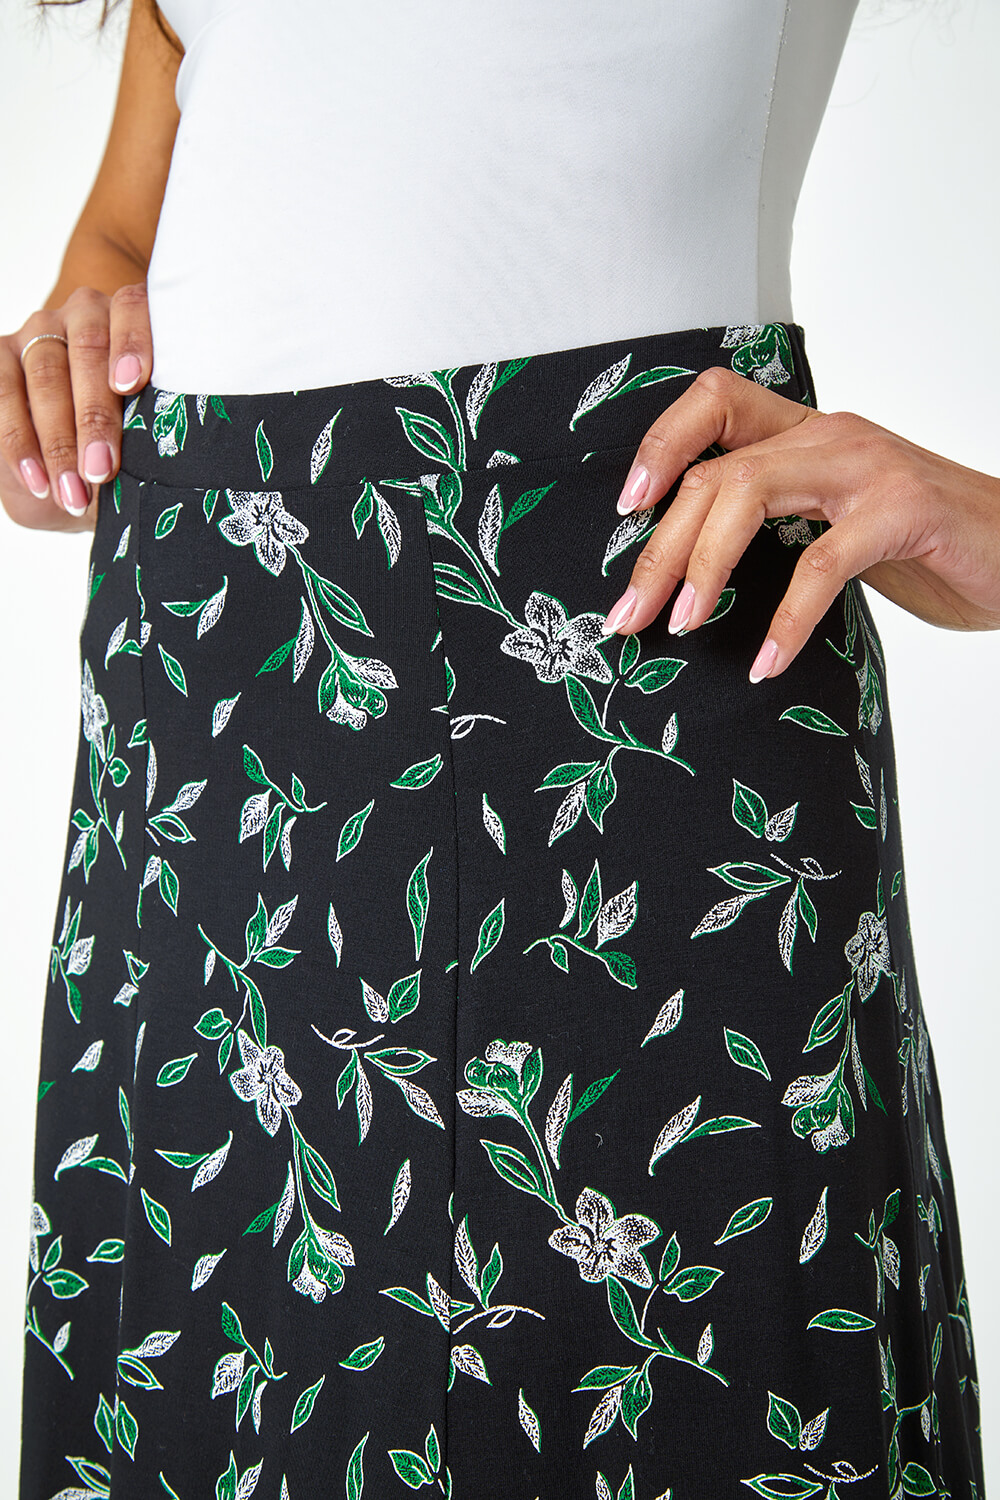 Green Floral Leaf Stretch Jersey Midi Skirt, Image 5 of 5